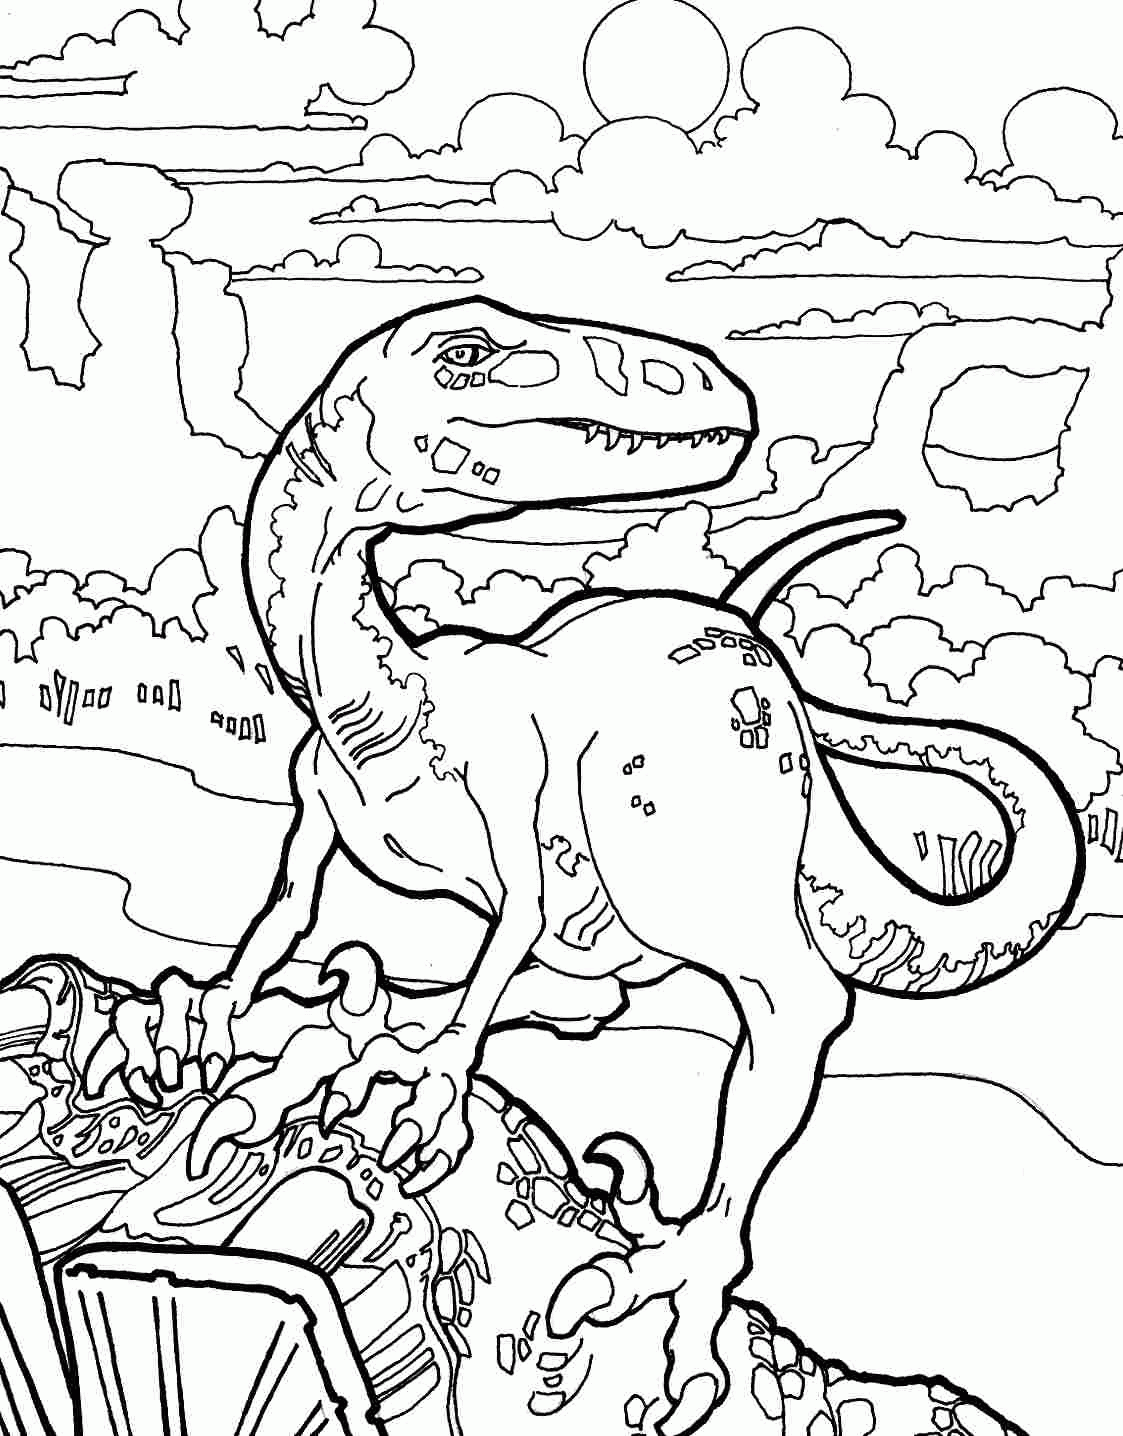 Download Velociraptor Coloring Pages - Best Coloring Pages For Kids